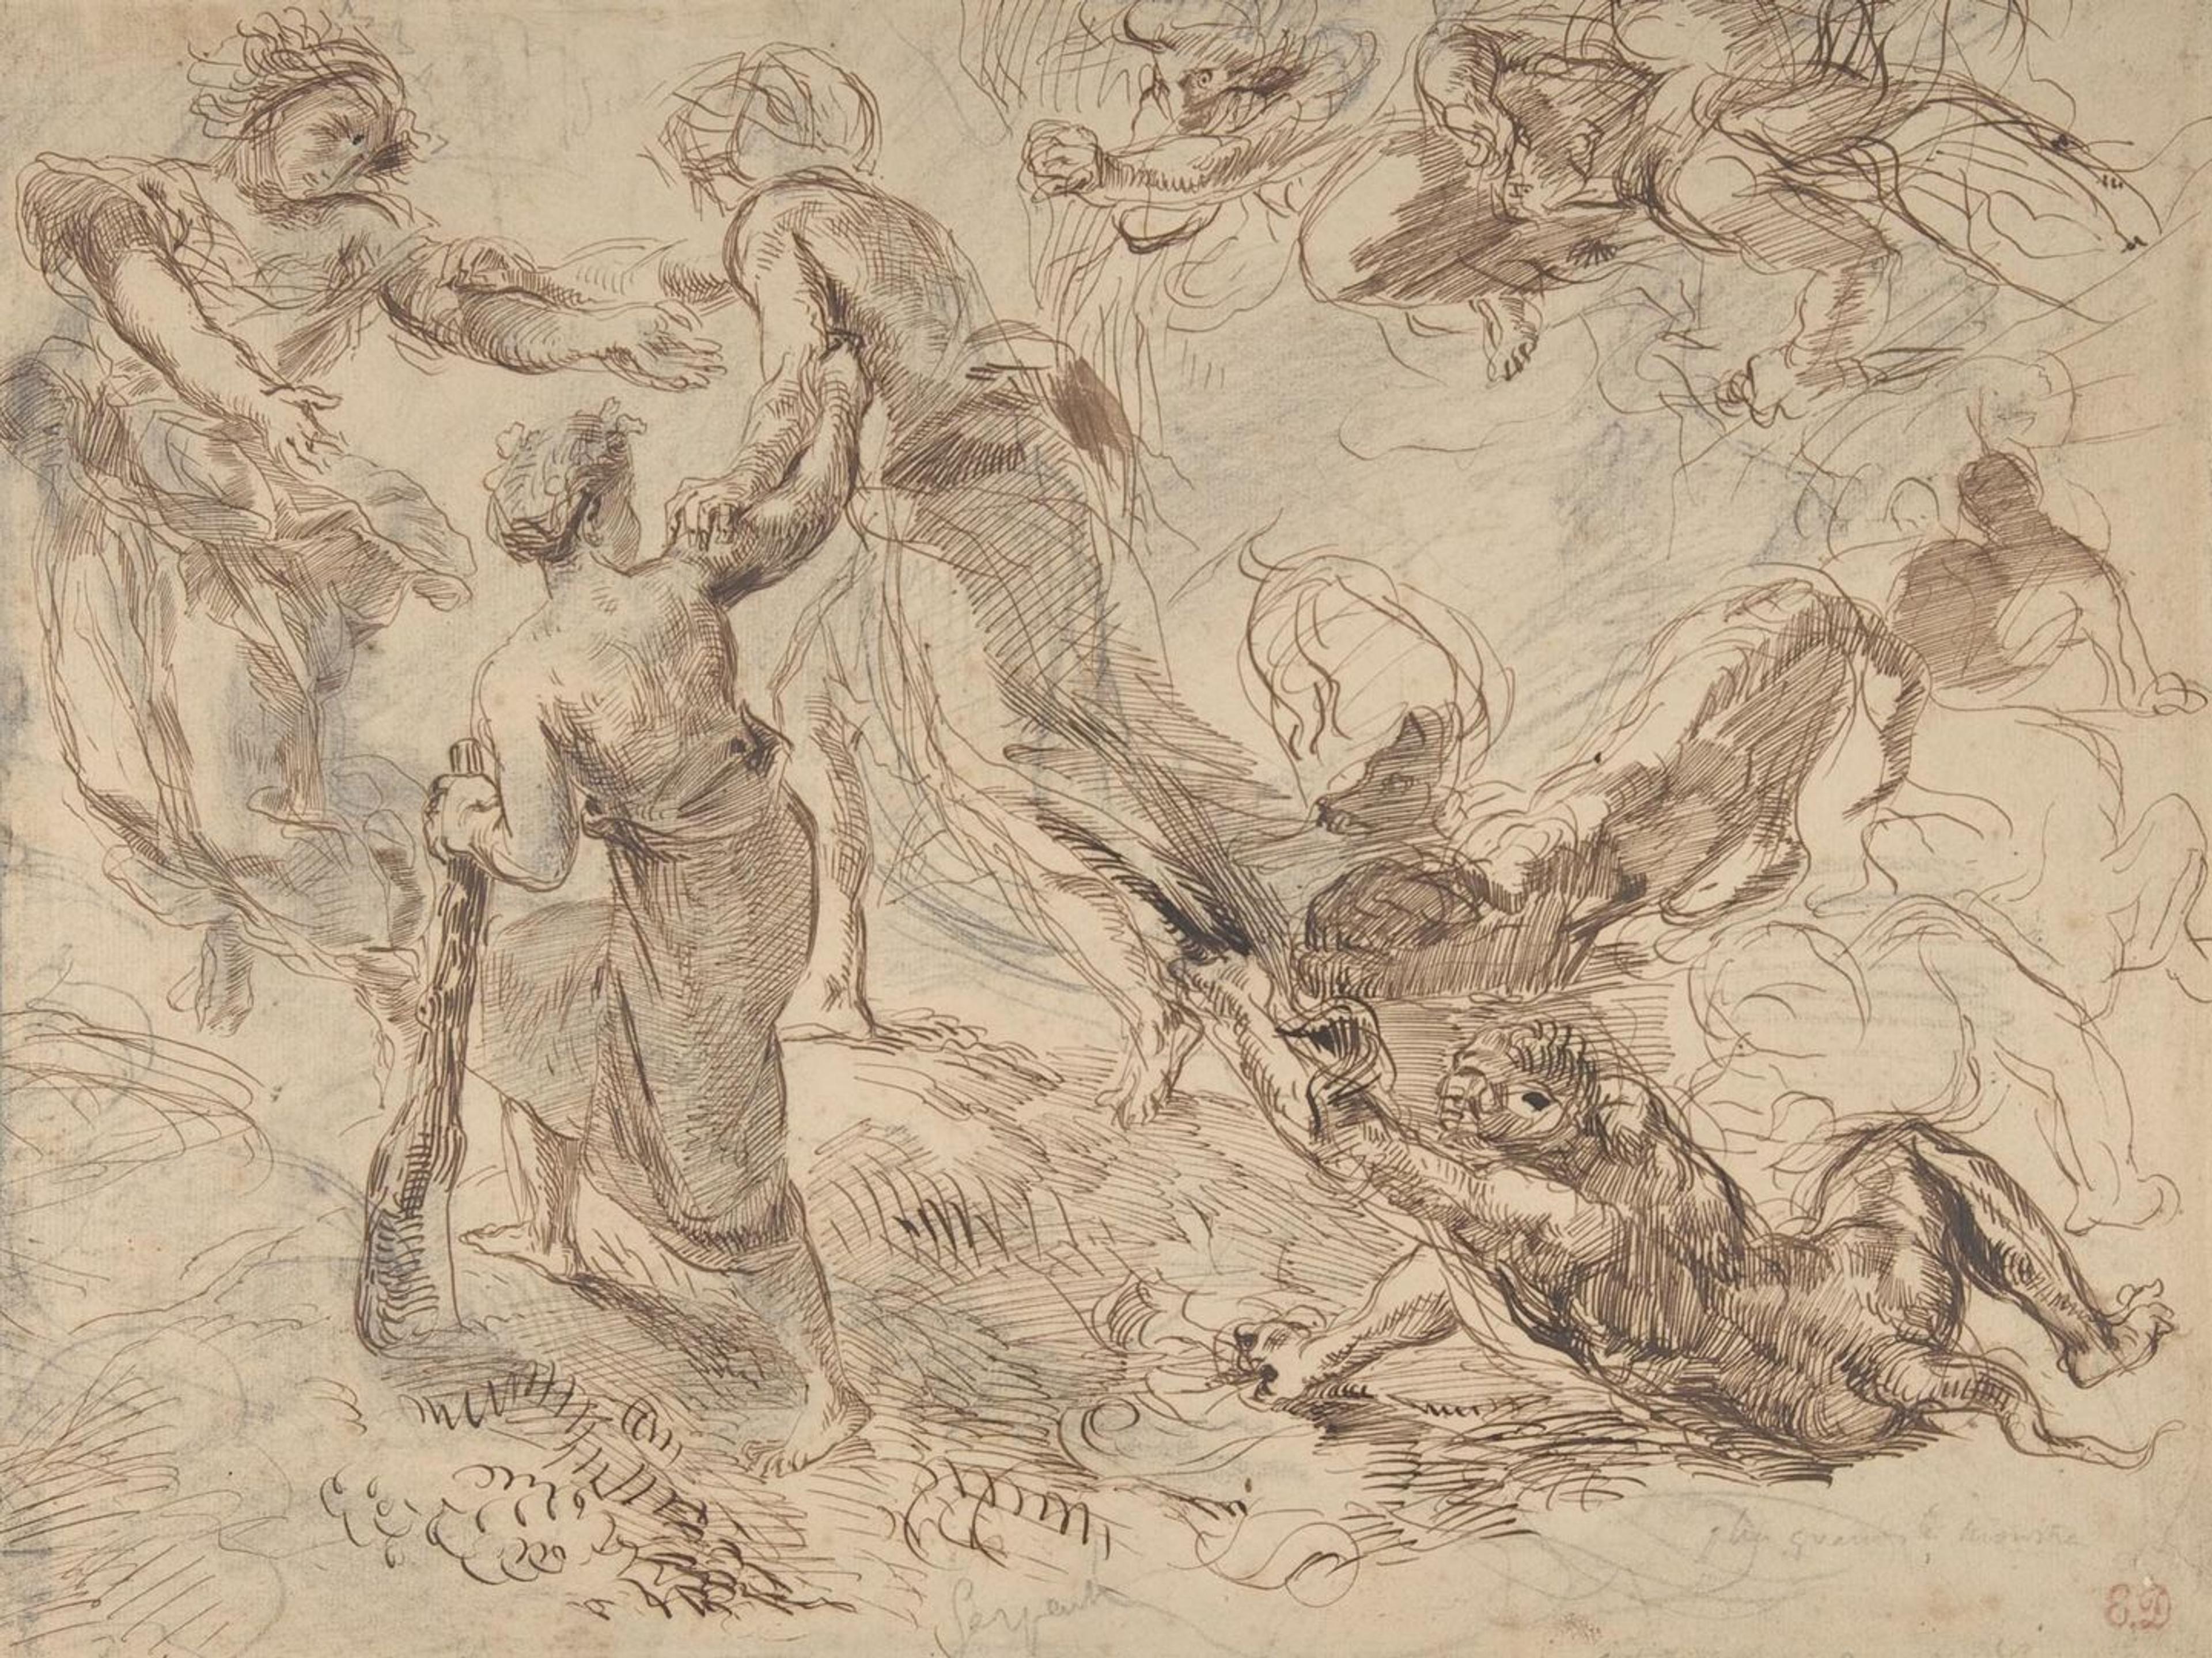 Delacroix drawing of an allegory of Genius and Envy